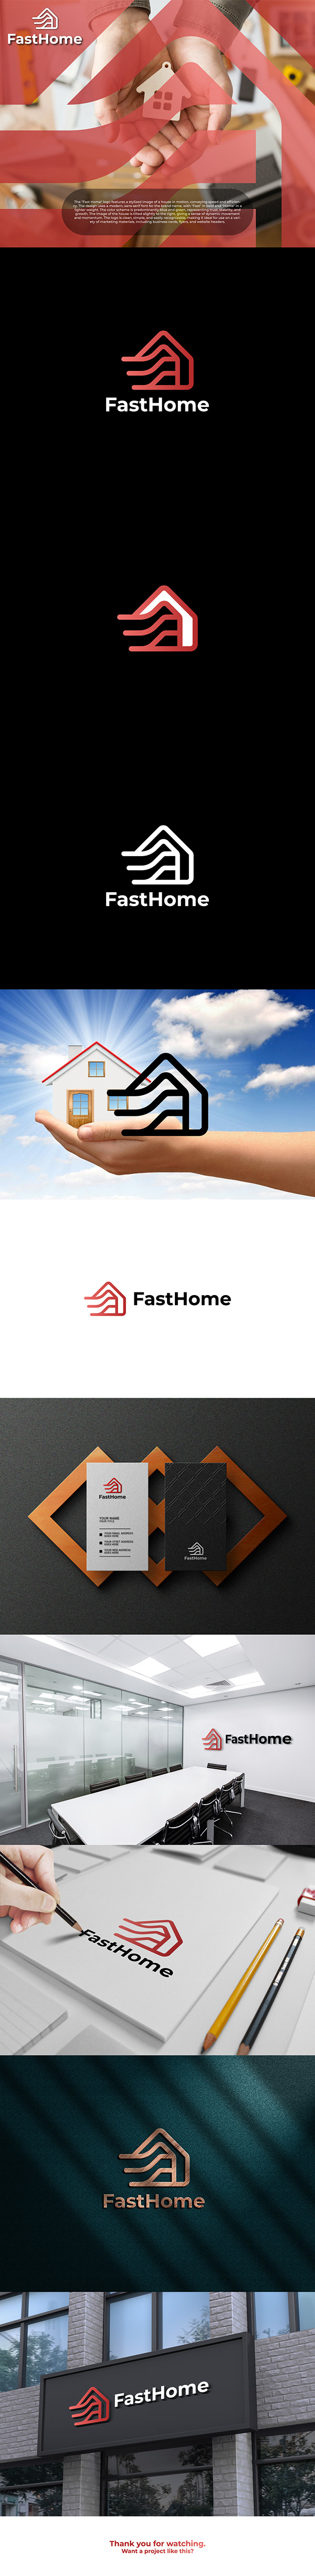 fast home, logo, house, realty, real estate agency